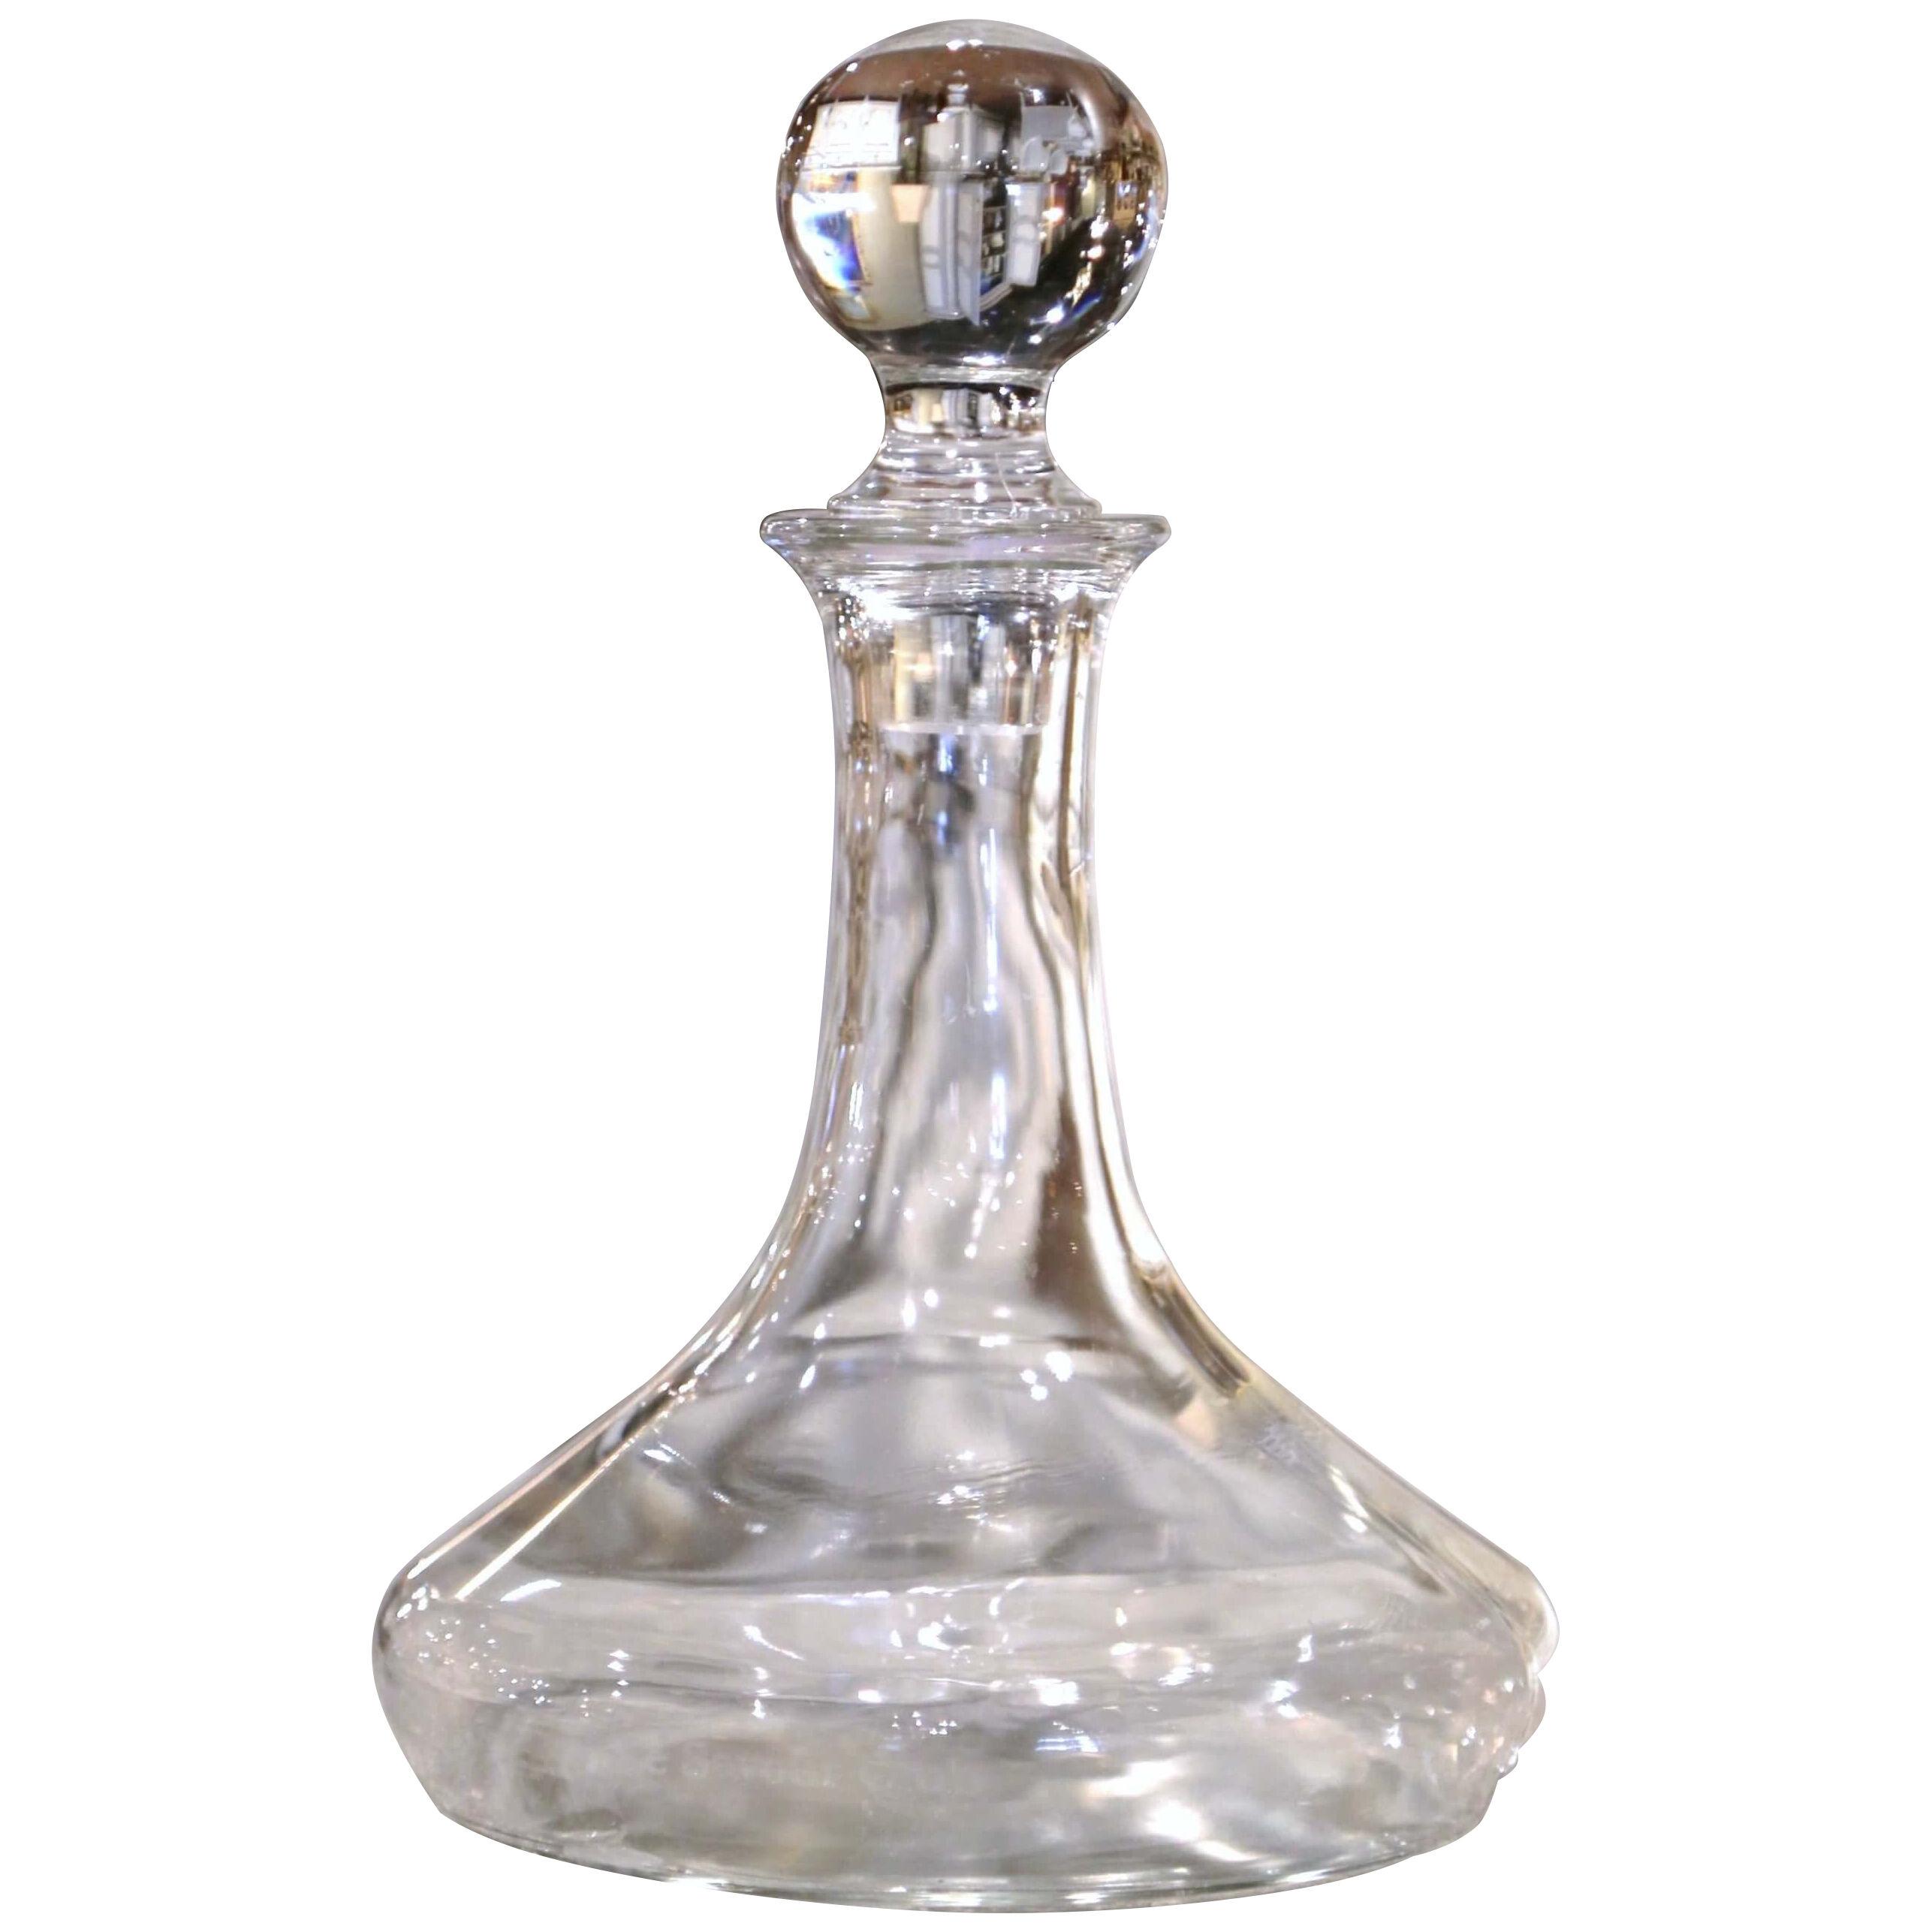 Midcentury French Glass Wine Carafe Decanter with Stopper